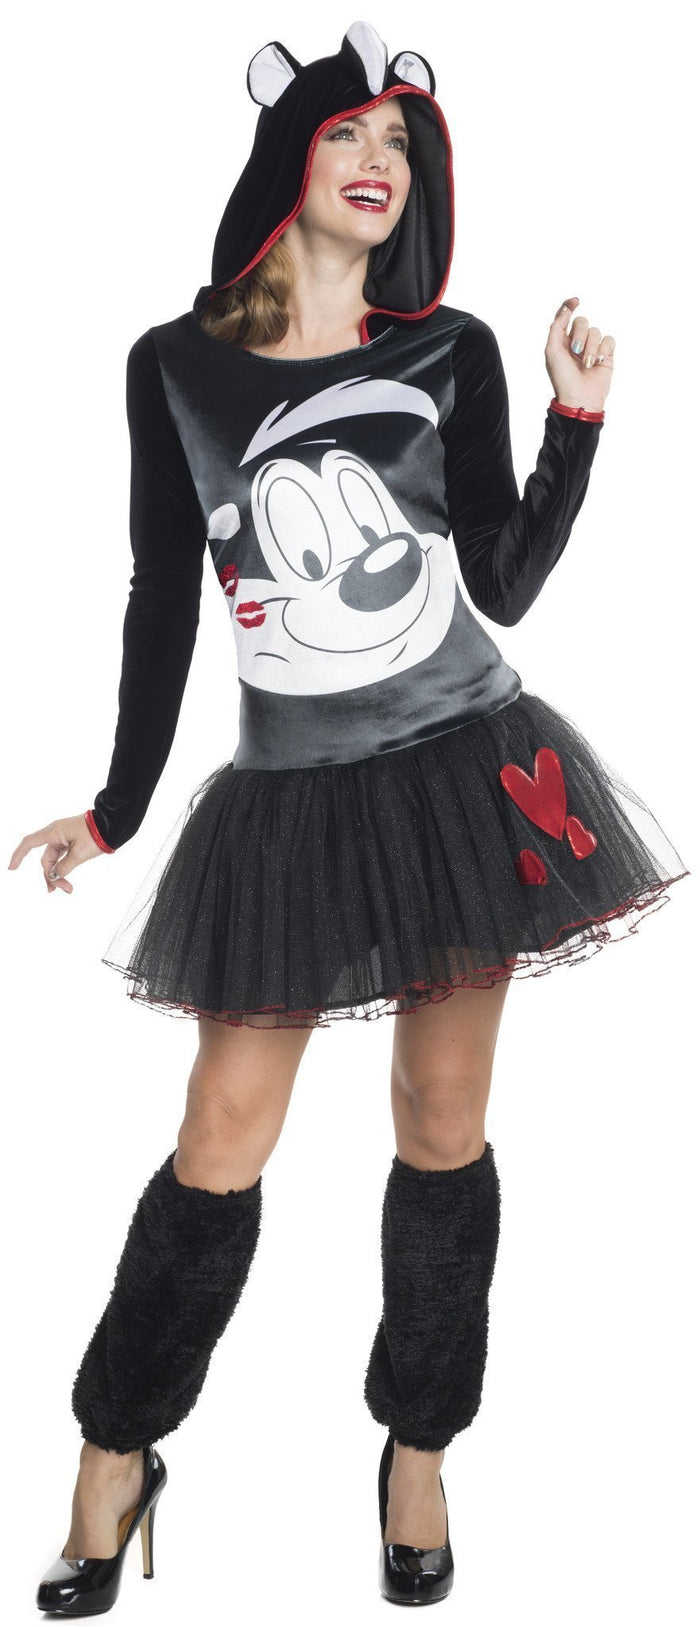 Pepe Le Pew Hooded Tutu Costume for Adults - Warner Bros Looney Tunes